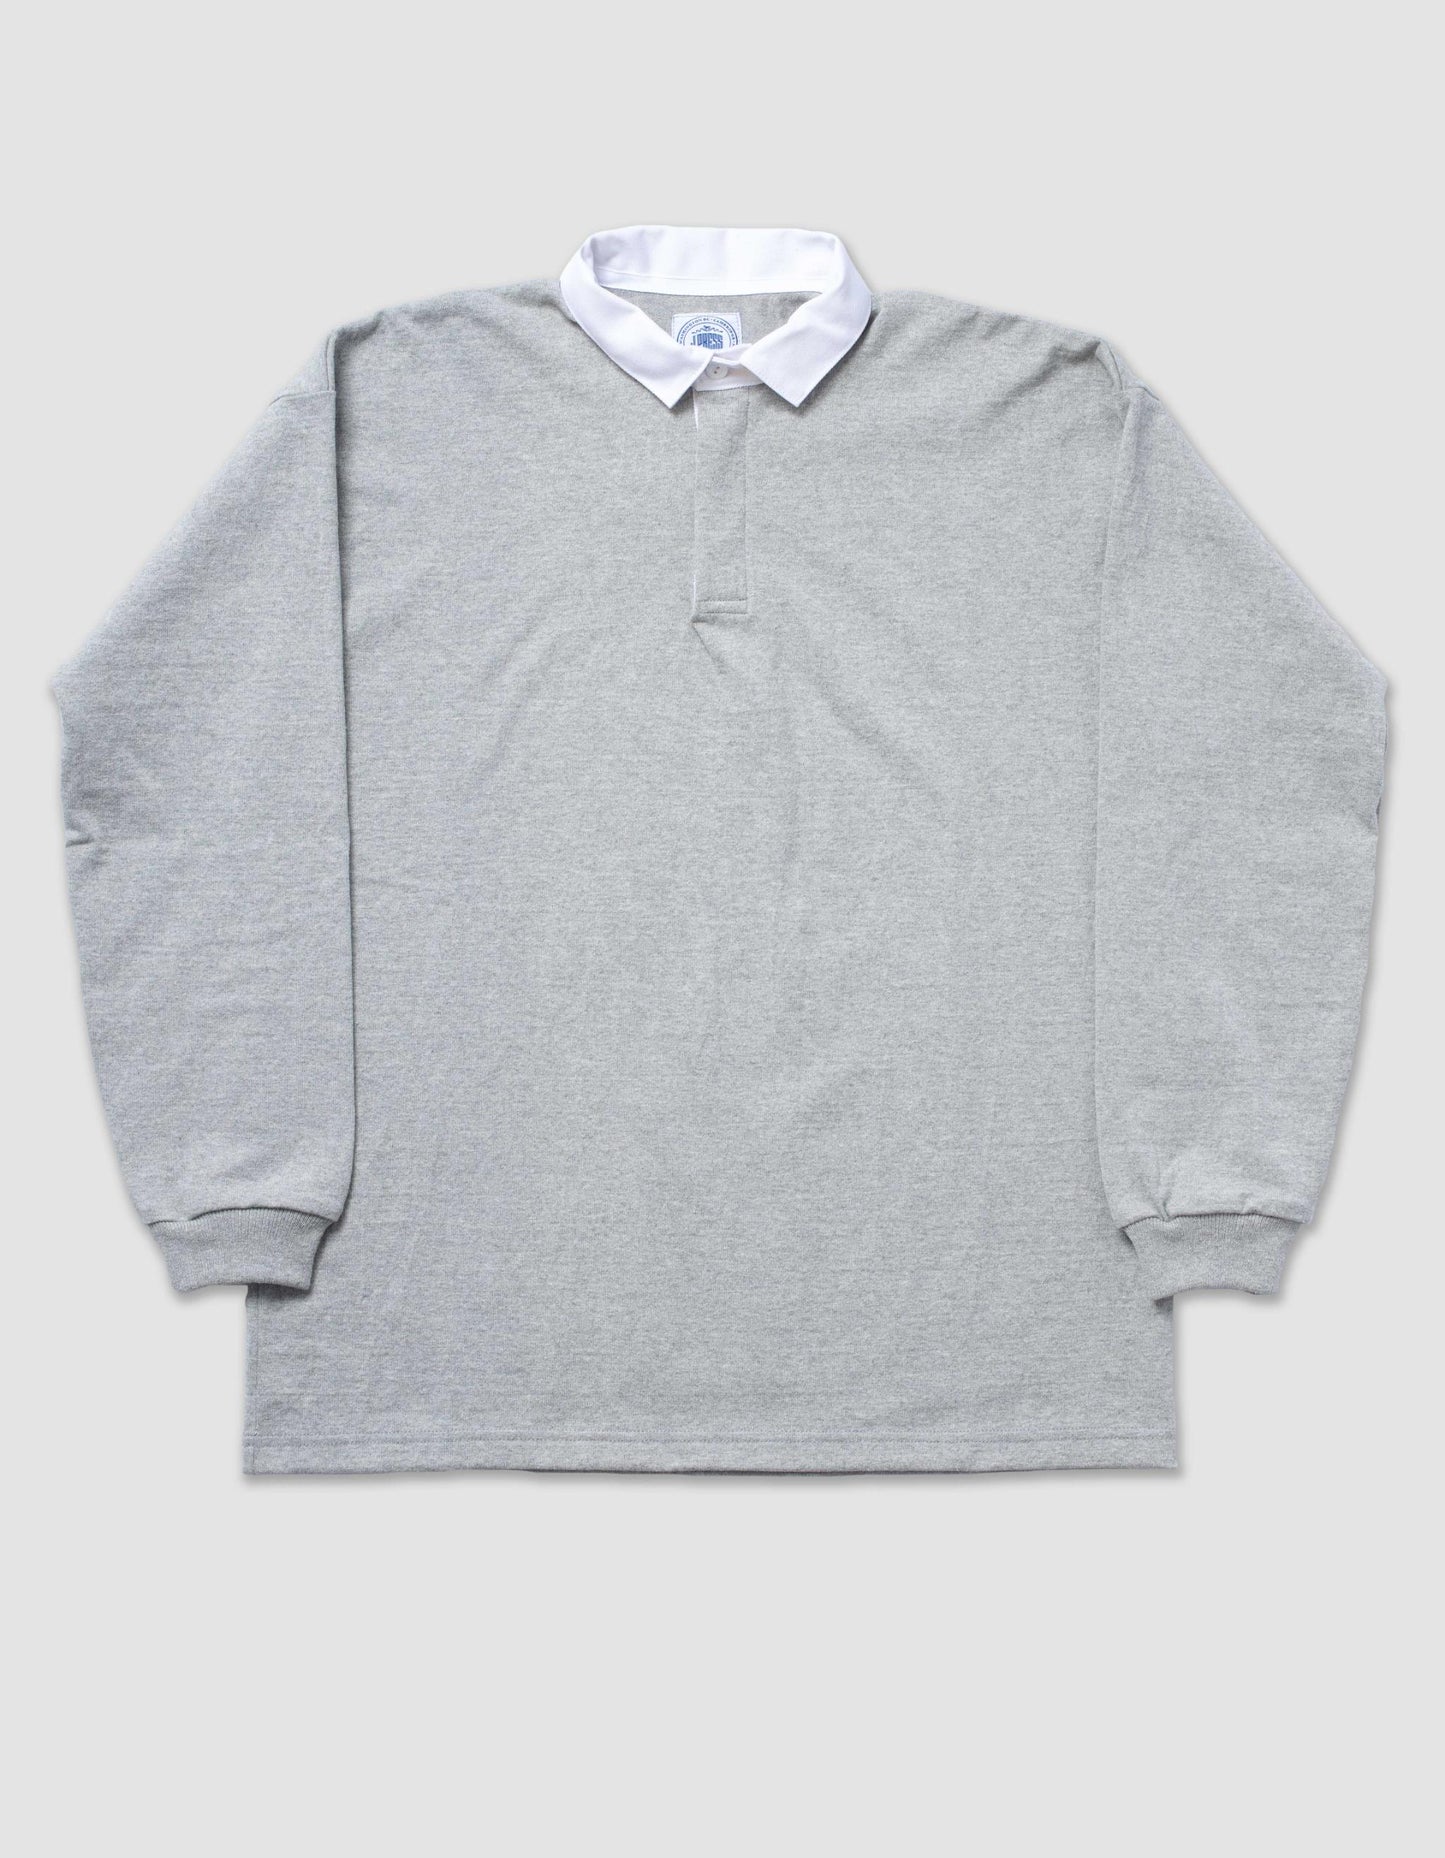 SOLID RUGBY SHIRT - GREY